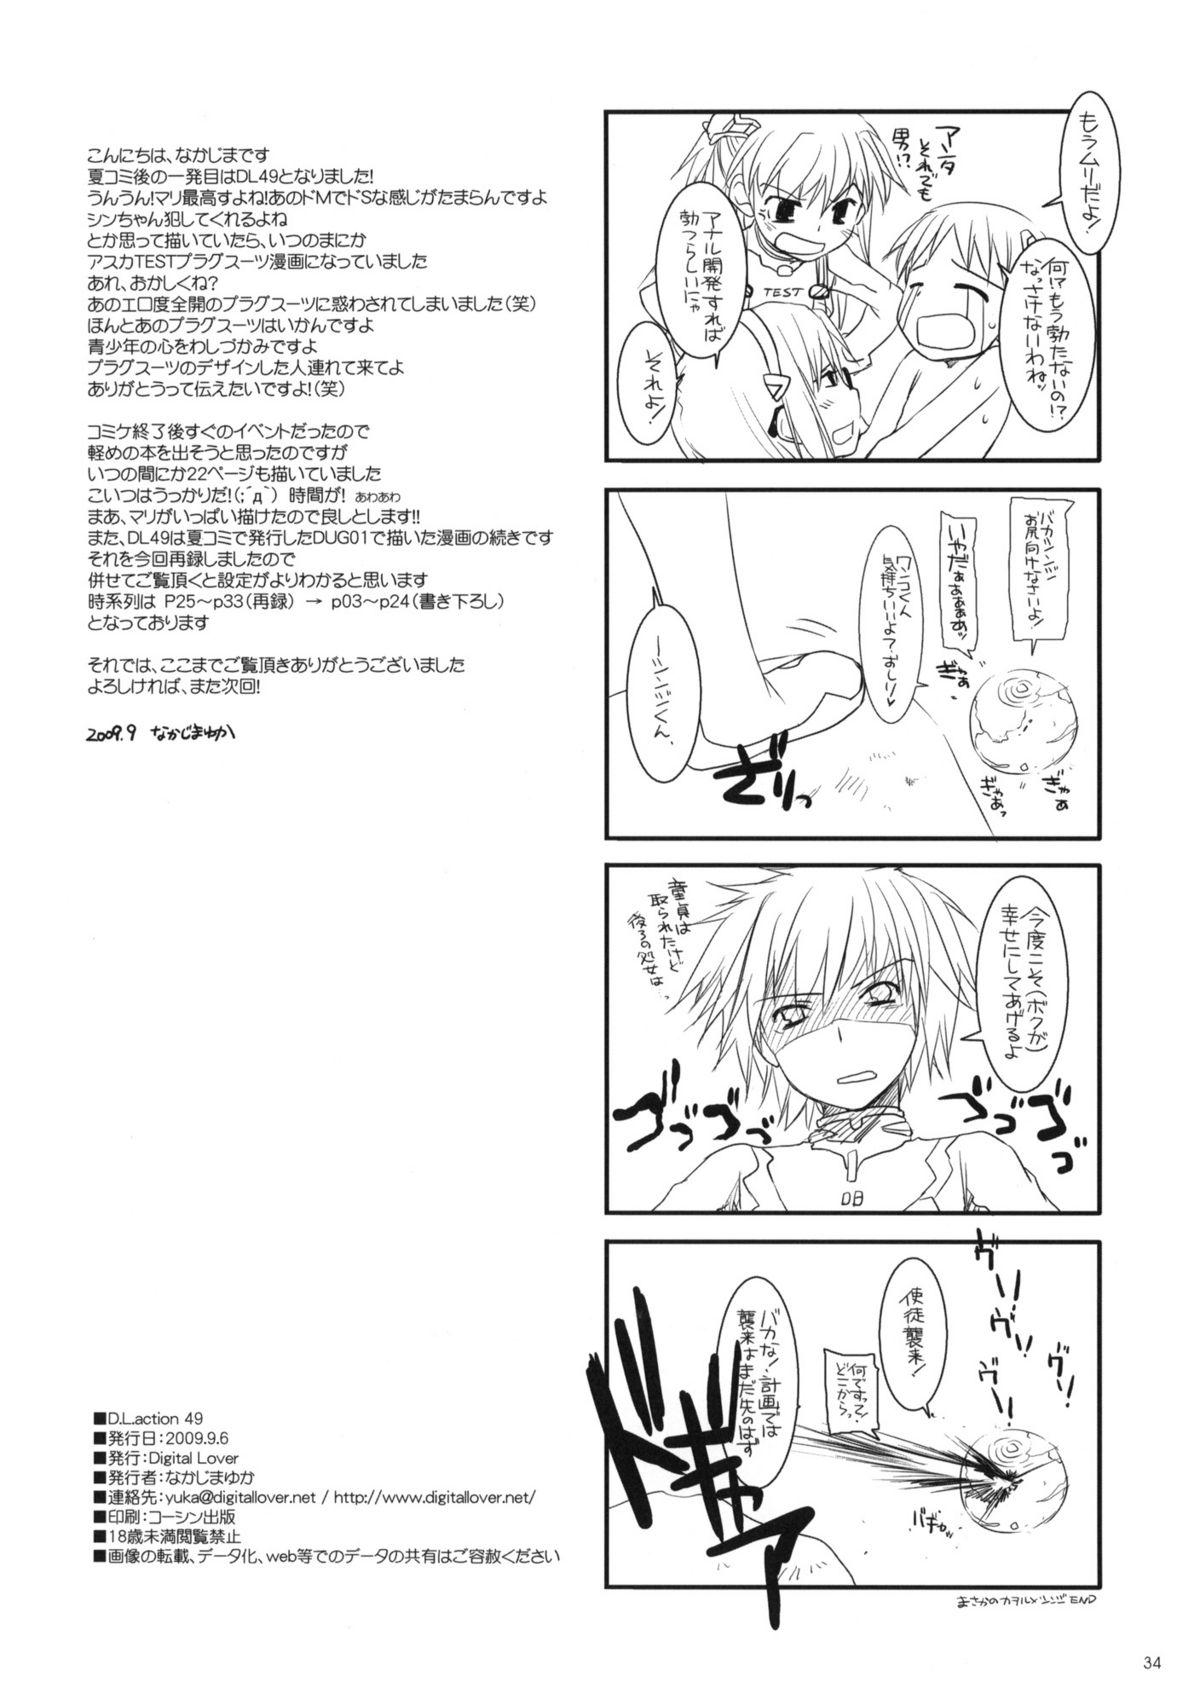 Jap D.L.Action 49 - Neon genesis evangelion Anal Play - Page 33